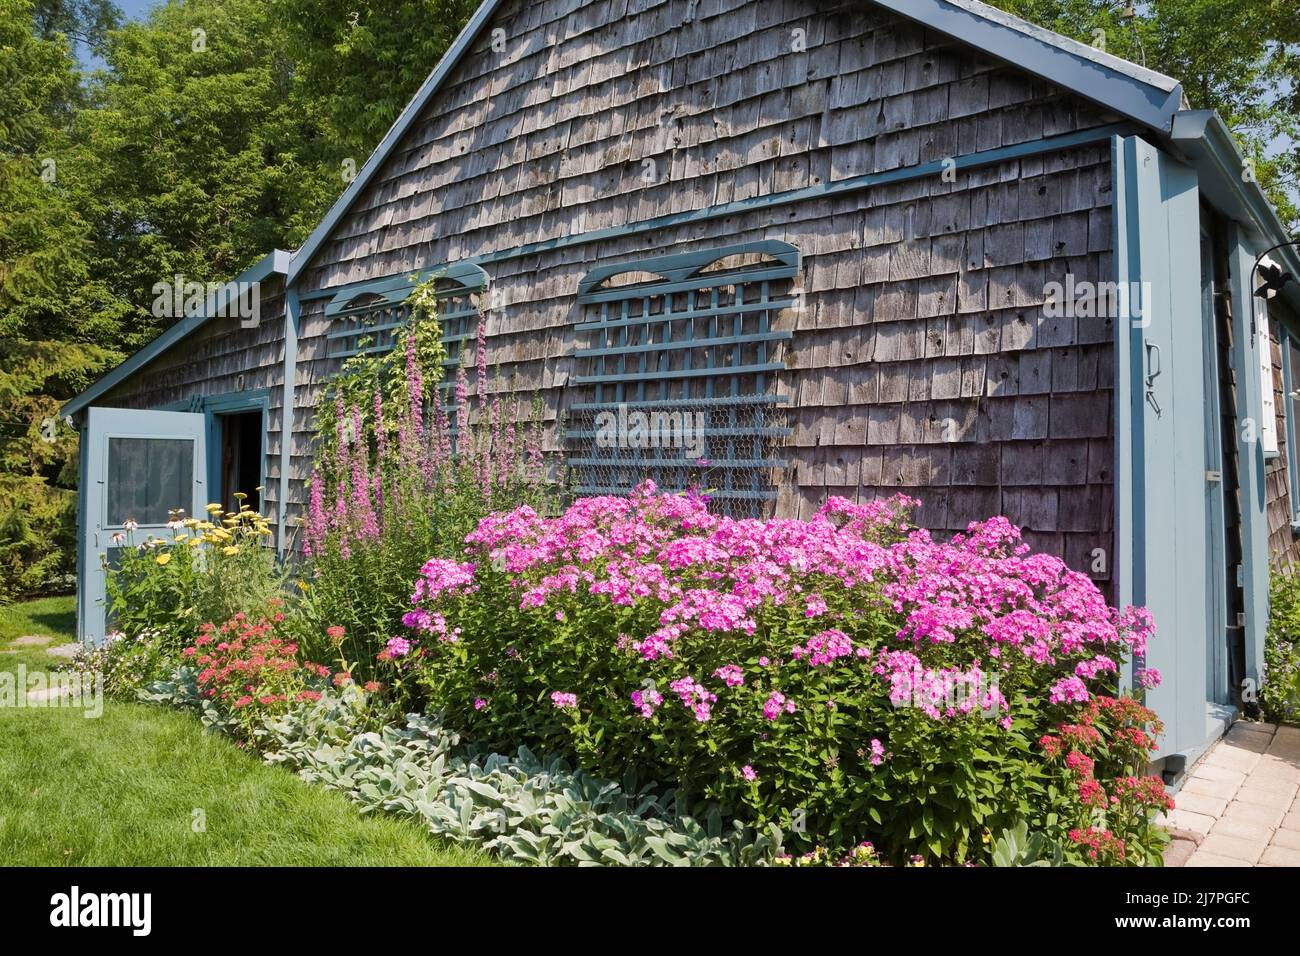 Old circa 1830 cedar wood shingles cladded storage shed bordered with purple phlox flowers in landscaped backyard. Stock Photo